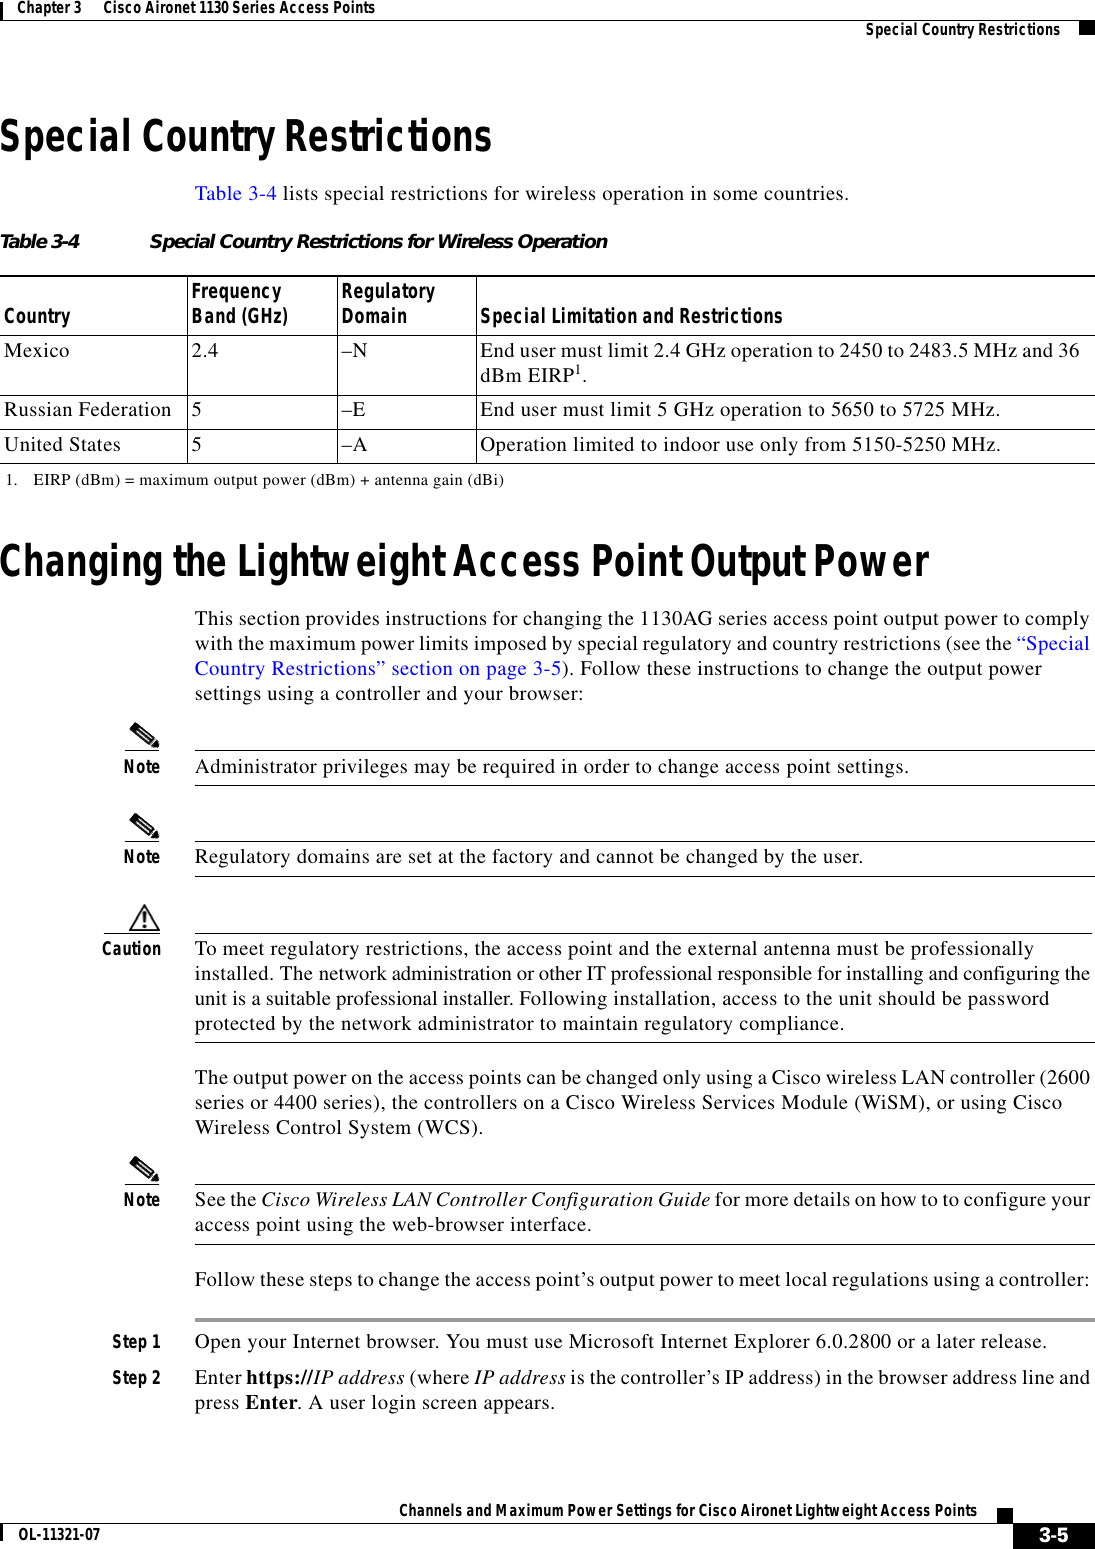  3-5Channels and Maximum Power Settings for Cisco Aironet Lightweight Access PointsOL-11321-07Chapter 3      Cisco Aironet 1130 Series Access Points   Special Country RestrictionsSpecial Country RestrictionsTable 3-4 lists special restrictions for wireless operation in some countries. Changing the Lightweight Access Point Output PowerThis section provides instructions for changing the 1130AG series access point output power to comply with the maximum power limits imposed by special regulatory and country restrictions (see the “Special Country Restrictions” section on page 3-5). Follow these instructions to change the output power settings using a controller and your browser:Note Administrator privileges may be required in order to change access point settings.Note Regulatory domains are set at the factory and cannot be changed by the user.Caution To meet regulatory restrictions, the access point and the external antenna must be professionally installed. The network administration or other IT professional responsible for installing and configuring the unit is a suitable professional installer. Following installation, access to the unit should be password protected by the network administrator to maintain regulatory compliance.The output power on the access points can be changed only using a Cisco wireless LAN controller (2600 series or 4400 series), the controllers on a Cisco Wireless Services Module (WiSM), or using Cisco Wireless Control System (WCS). Note See the Cisco Wireless LAN Controller Configuration Guide for more details on how to to configure your access point using the web-browser interface.Follow these steps to change the access point’s output power to meet local regulations using a controller: Step 1 Open your Internet browser. You must use Microsoft Internet Explorer 6.0.2800 or a later release.Step 2 Enter https://IP address (where IP address is the controller’s IP address) in the browser address line and press Enter. A user login screen appears.Table 3-4 Special Country Restrictions for Wireless OperationCountry Frequency Band (GHz) Regulatory Domain Special Limitation and RestrictionsMexico 2.4 –N End user must limit 2.4 GHz operation to 2450 to 2483.5 MHz and 36 dBm EIRP1.1. EIRP (dBm) = maximum output power (dBm) + antenna gain (dBi)Russian Federation 5–E End user must limit 5 GHz operation to 5650 to 5725 MHz.United States 5  –A  Operation limited to indoor use only from 5150-5250 MHz.